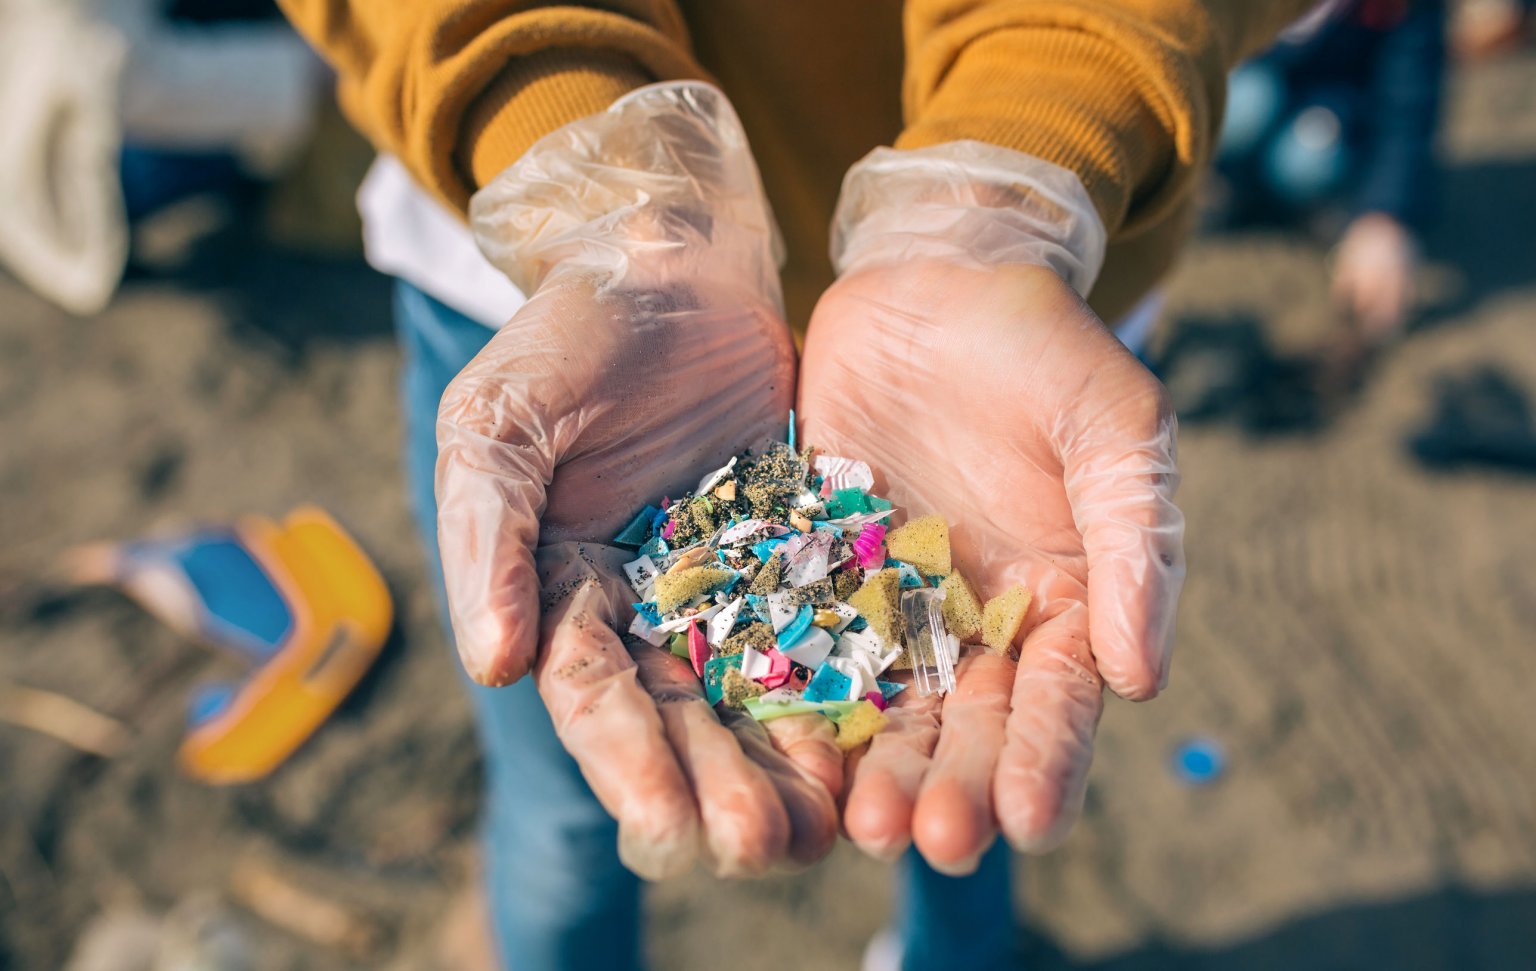 Microplastics And Their Impact On Human Health Causes Concern And